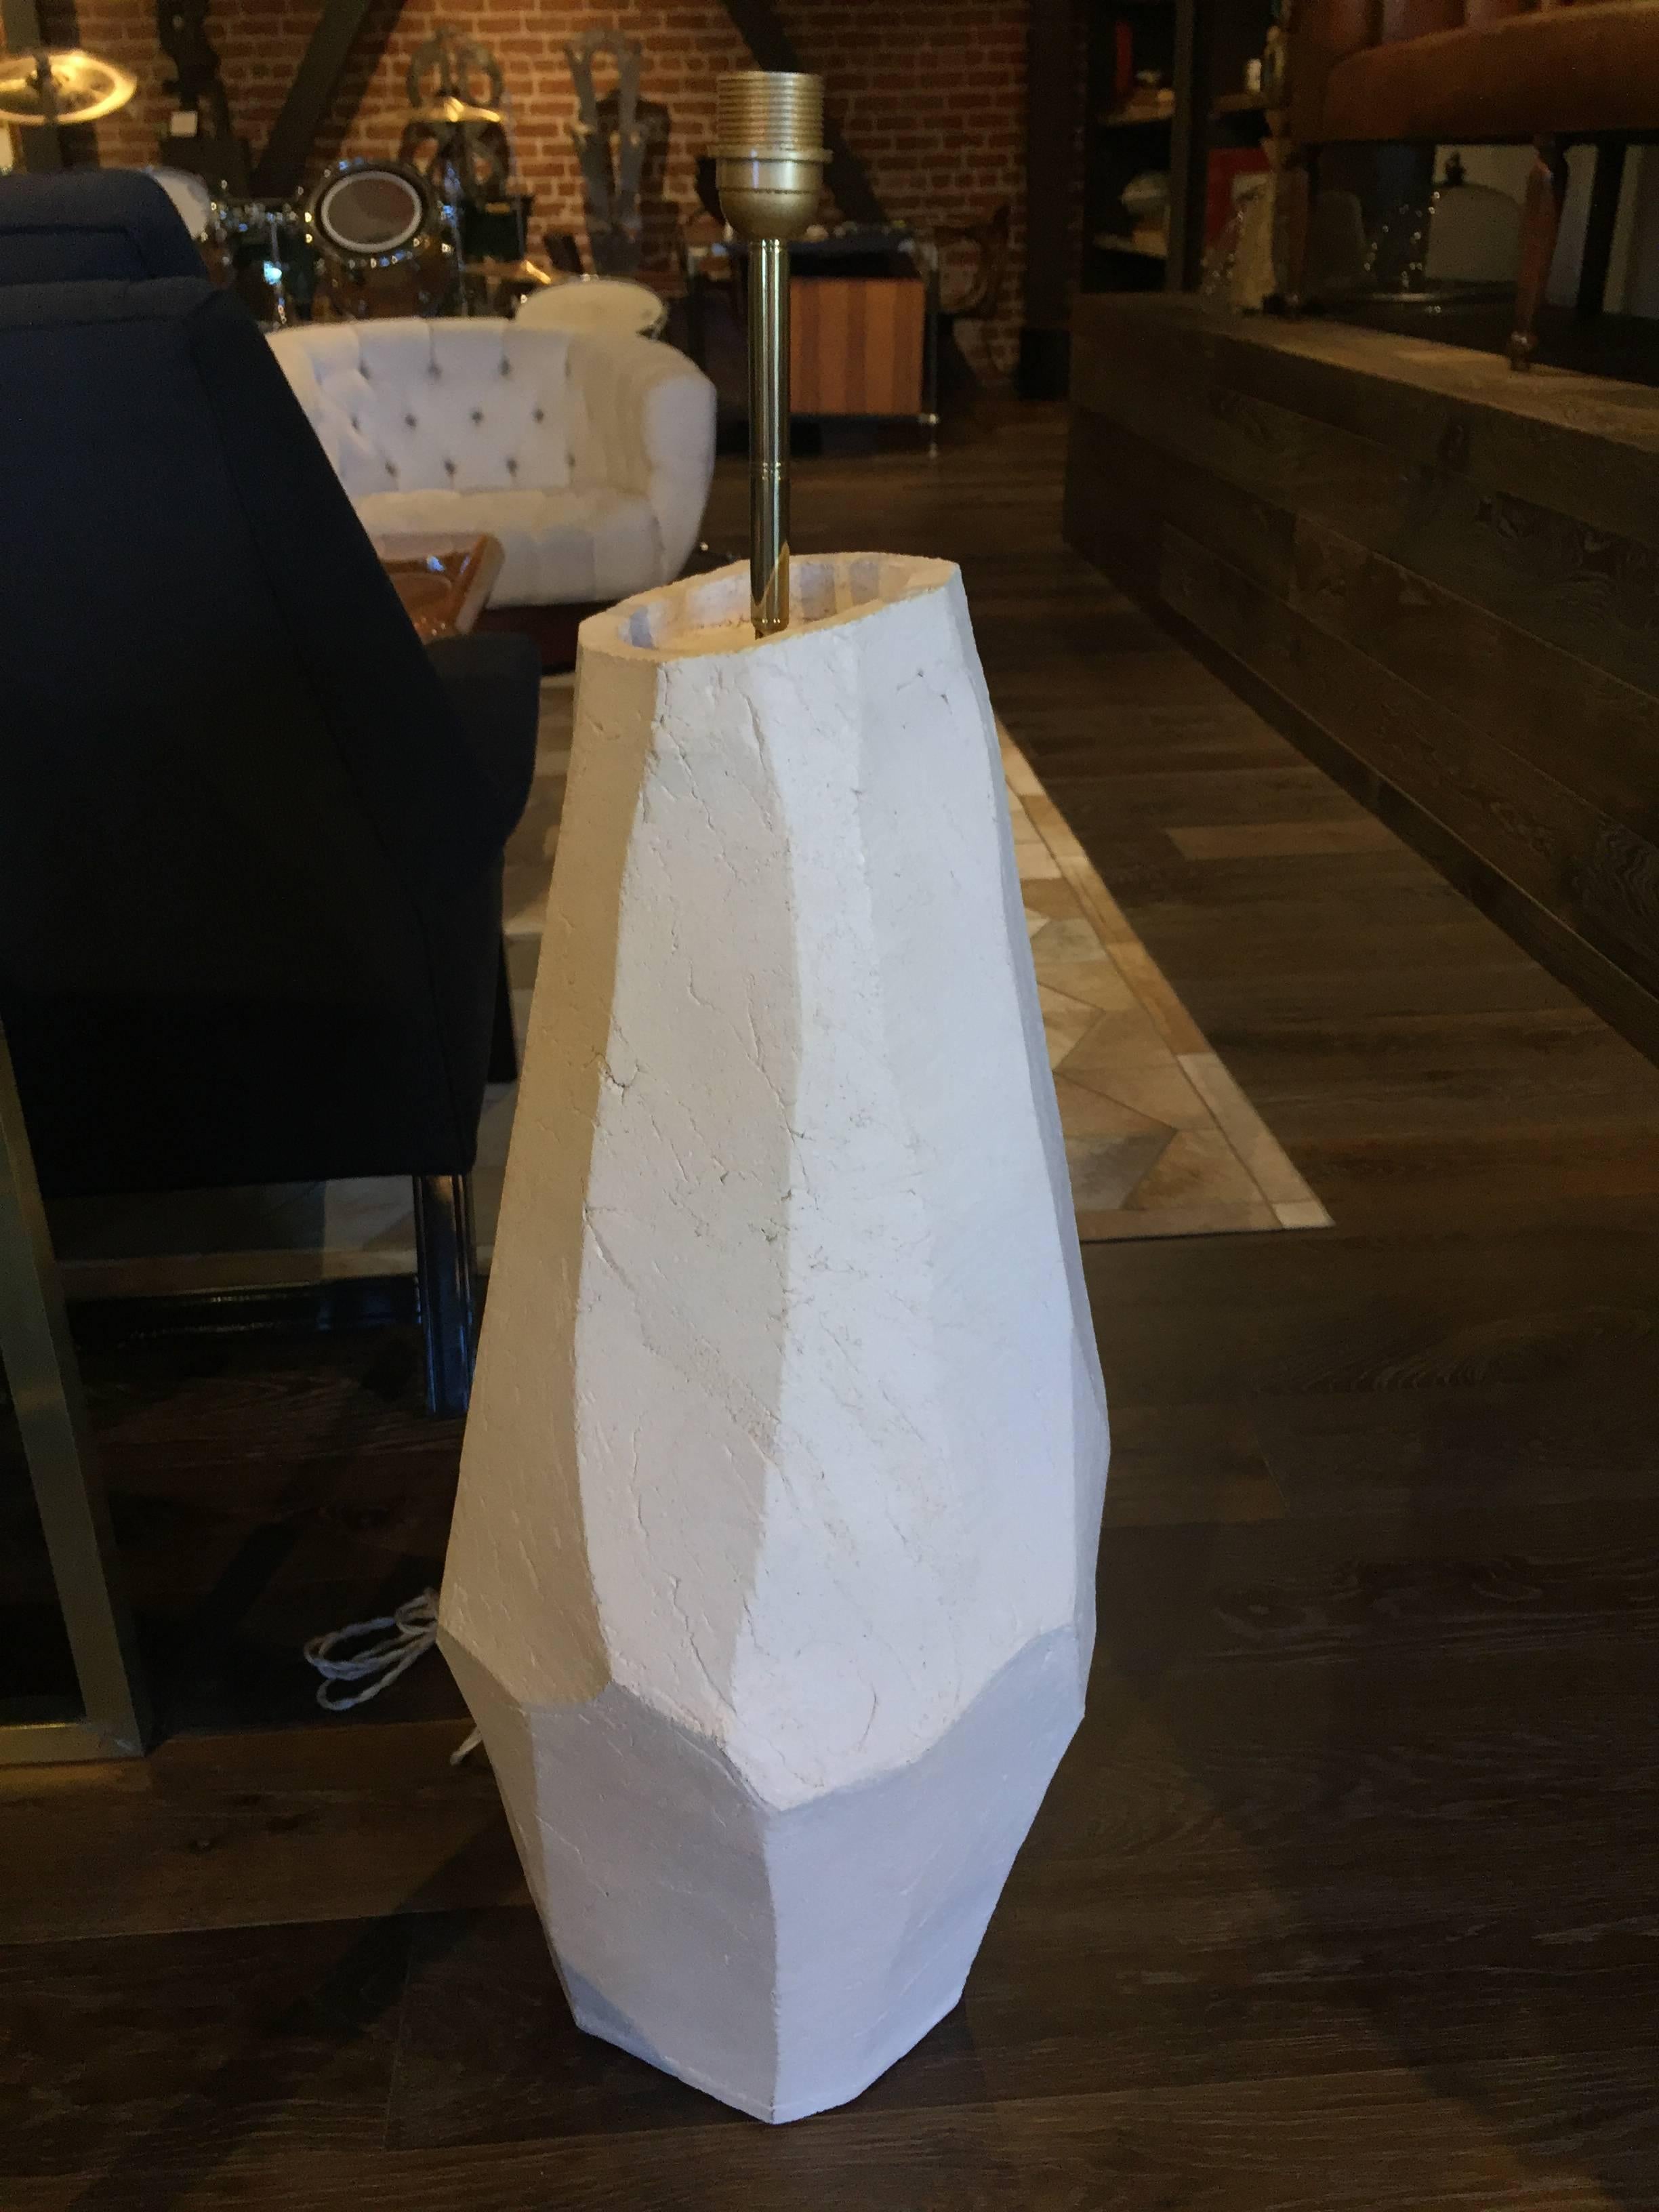 Faceted ceramic lamps are narrow and bold sculptural pieces that are both functional and artistic. Ceramic has organic character.

Shade is fabric lined in a beige color fabric.

Set of two.

Dimensions: 

Base dimensions: 14